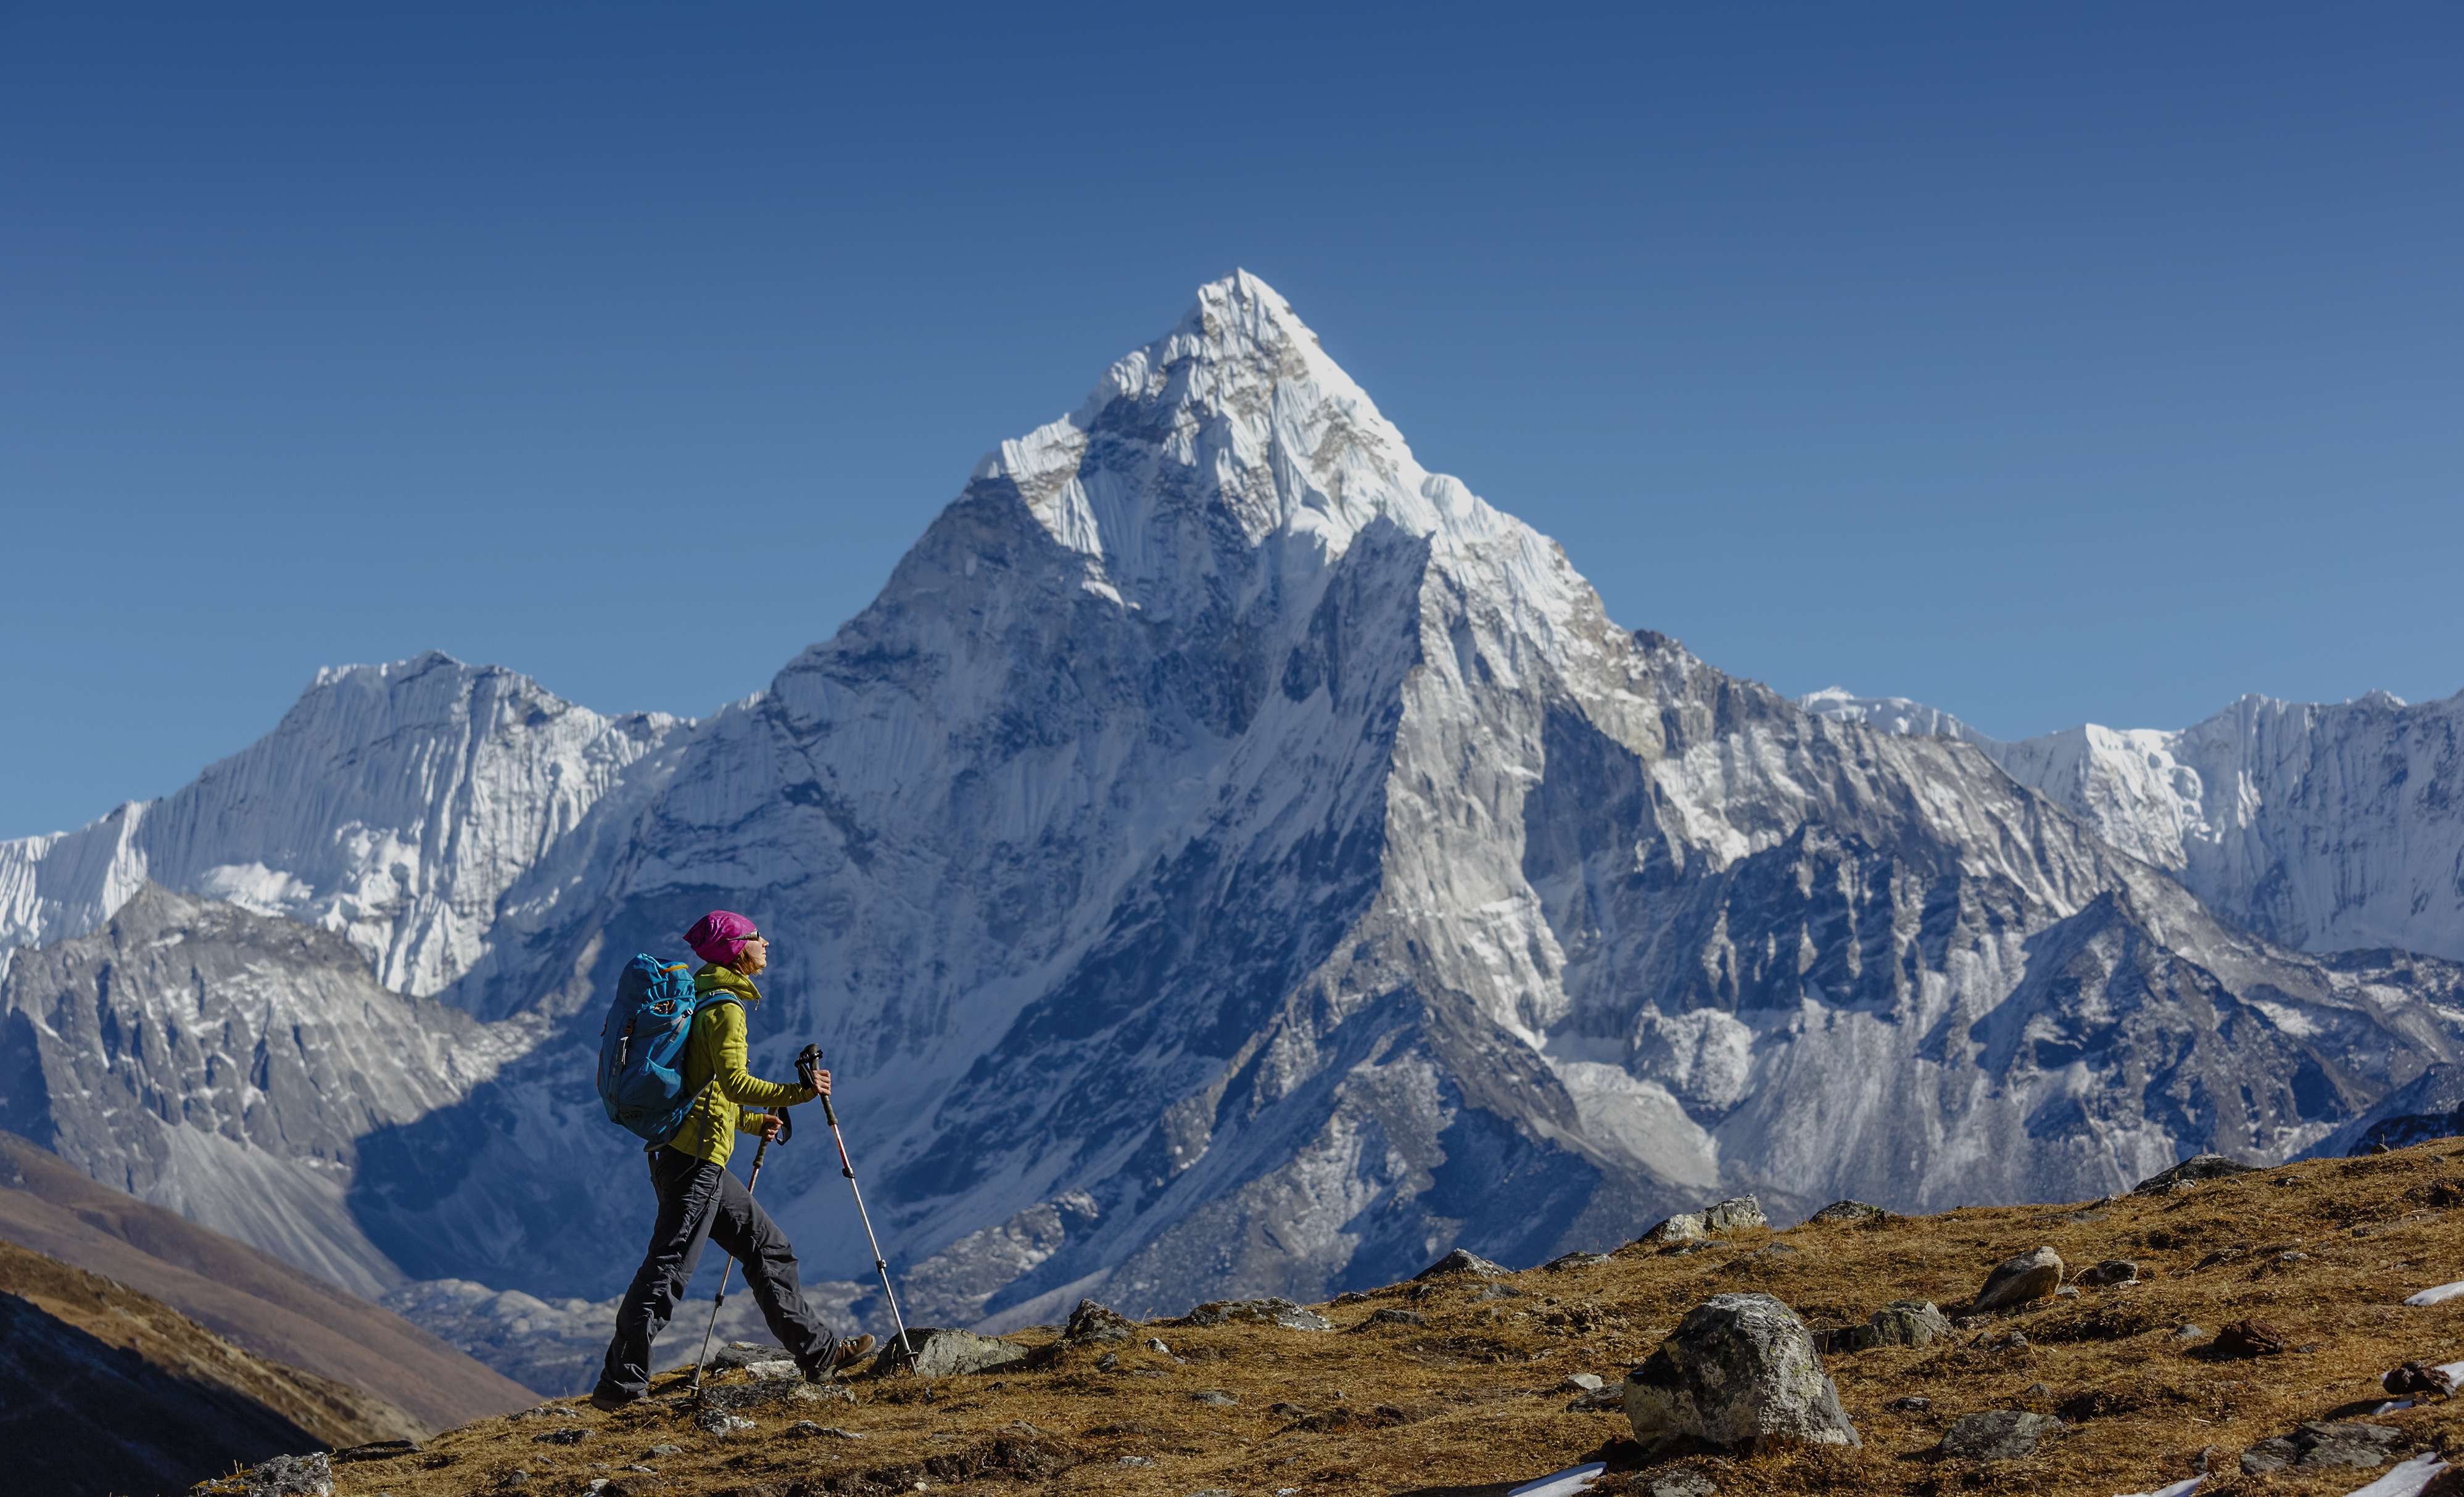 Climbers like Stephen Venables say the rise in the number of people visiting world’s highest peak brings added revenue for Sherpas, but also more trash, and pushes prices up for Nepali locals